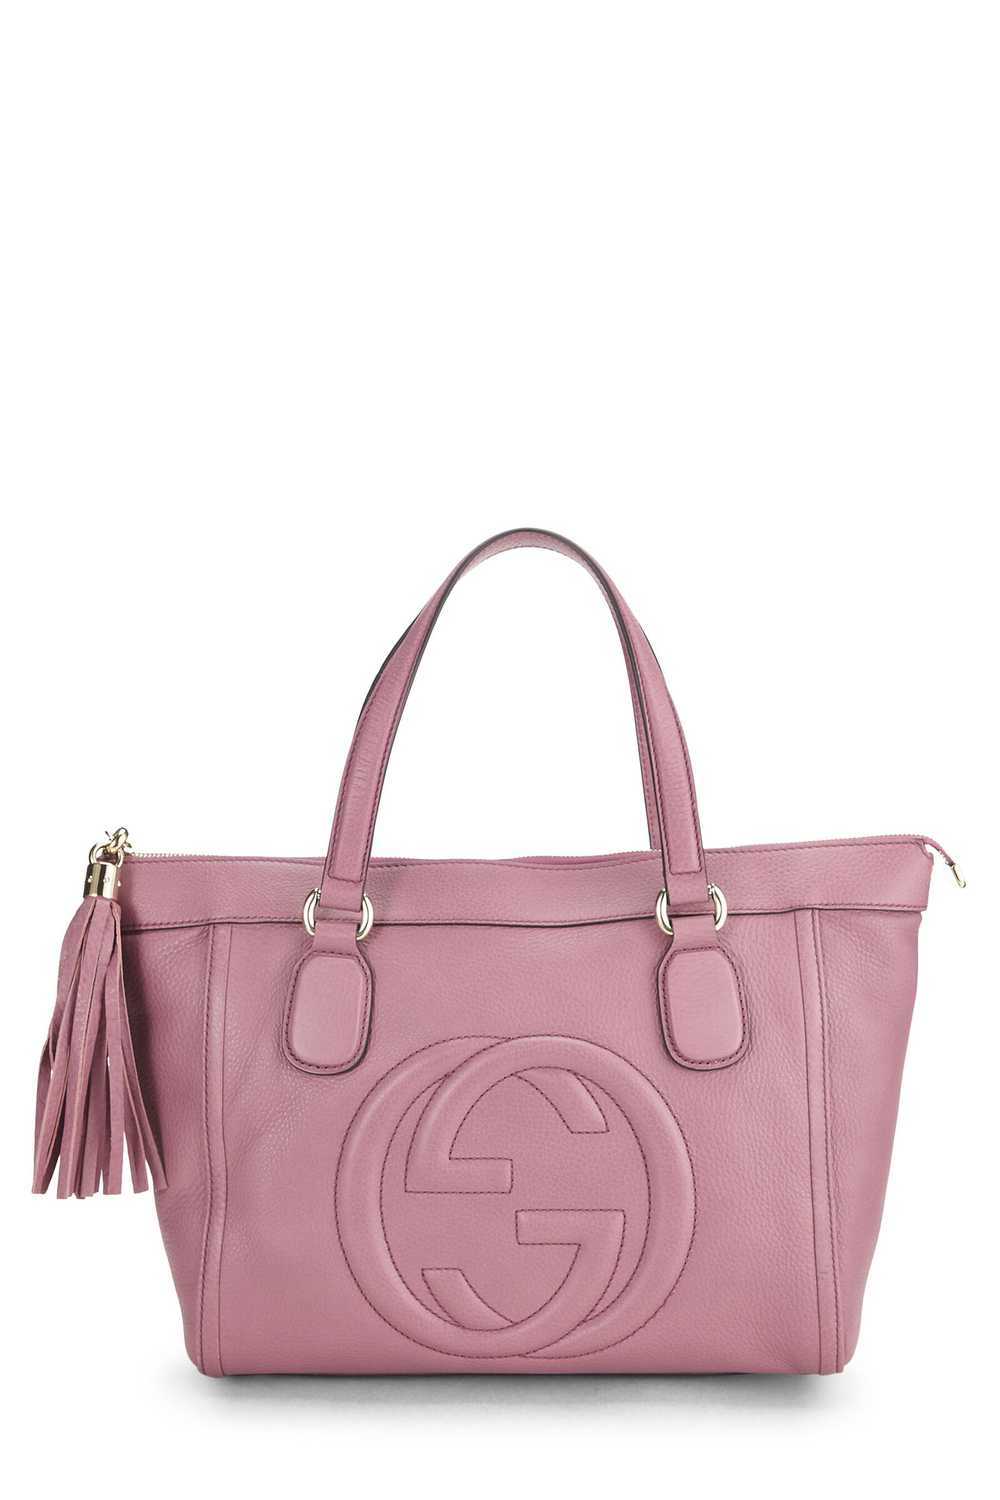 Pink Grained Leather Soho Zip Tote - image 1